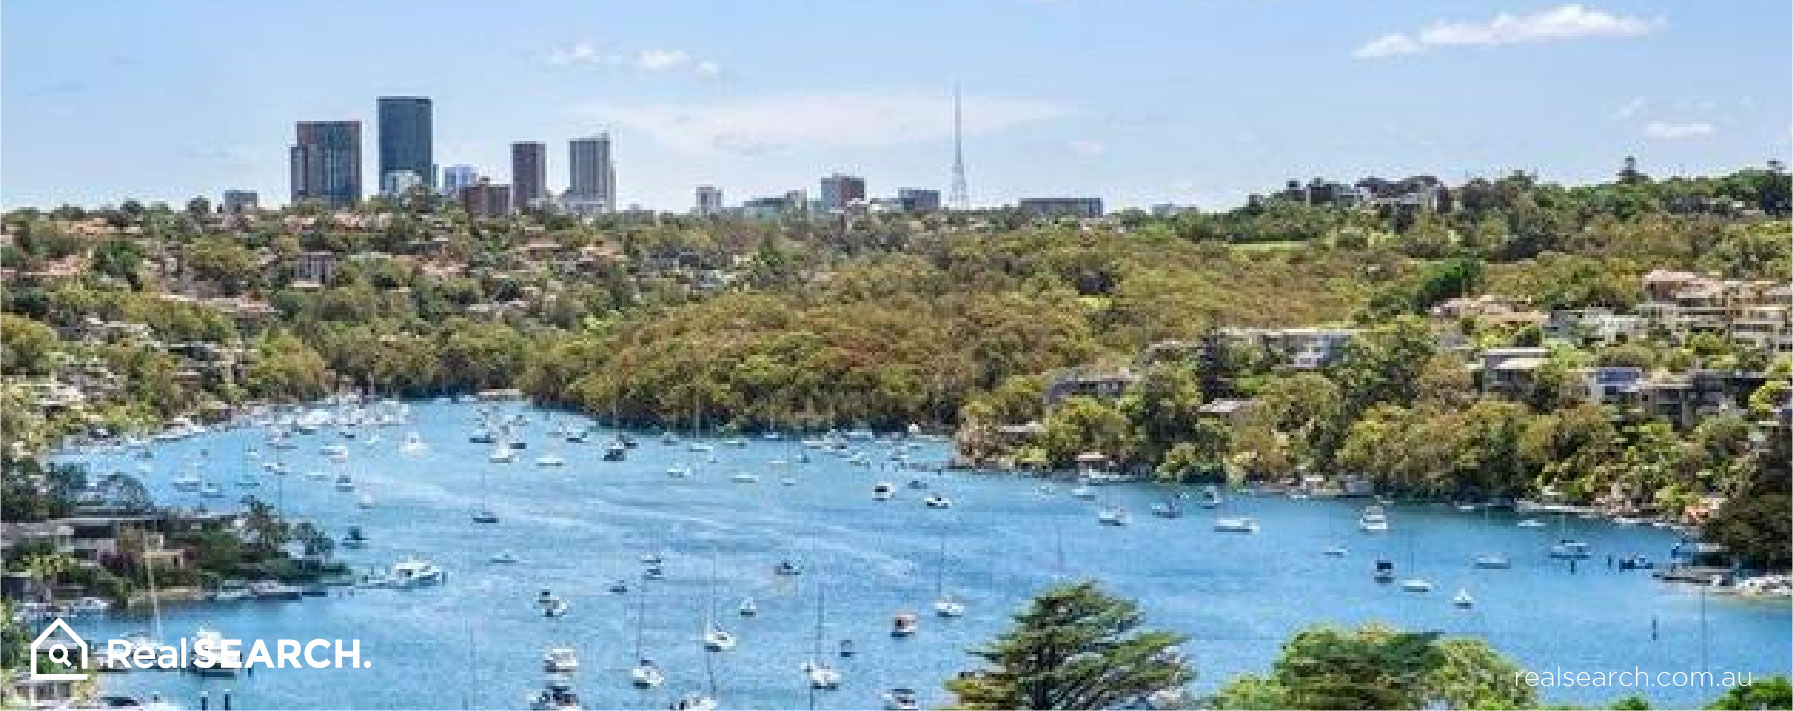 Mosman NSW 2088: A Suburb on the Rise